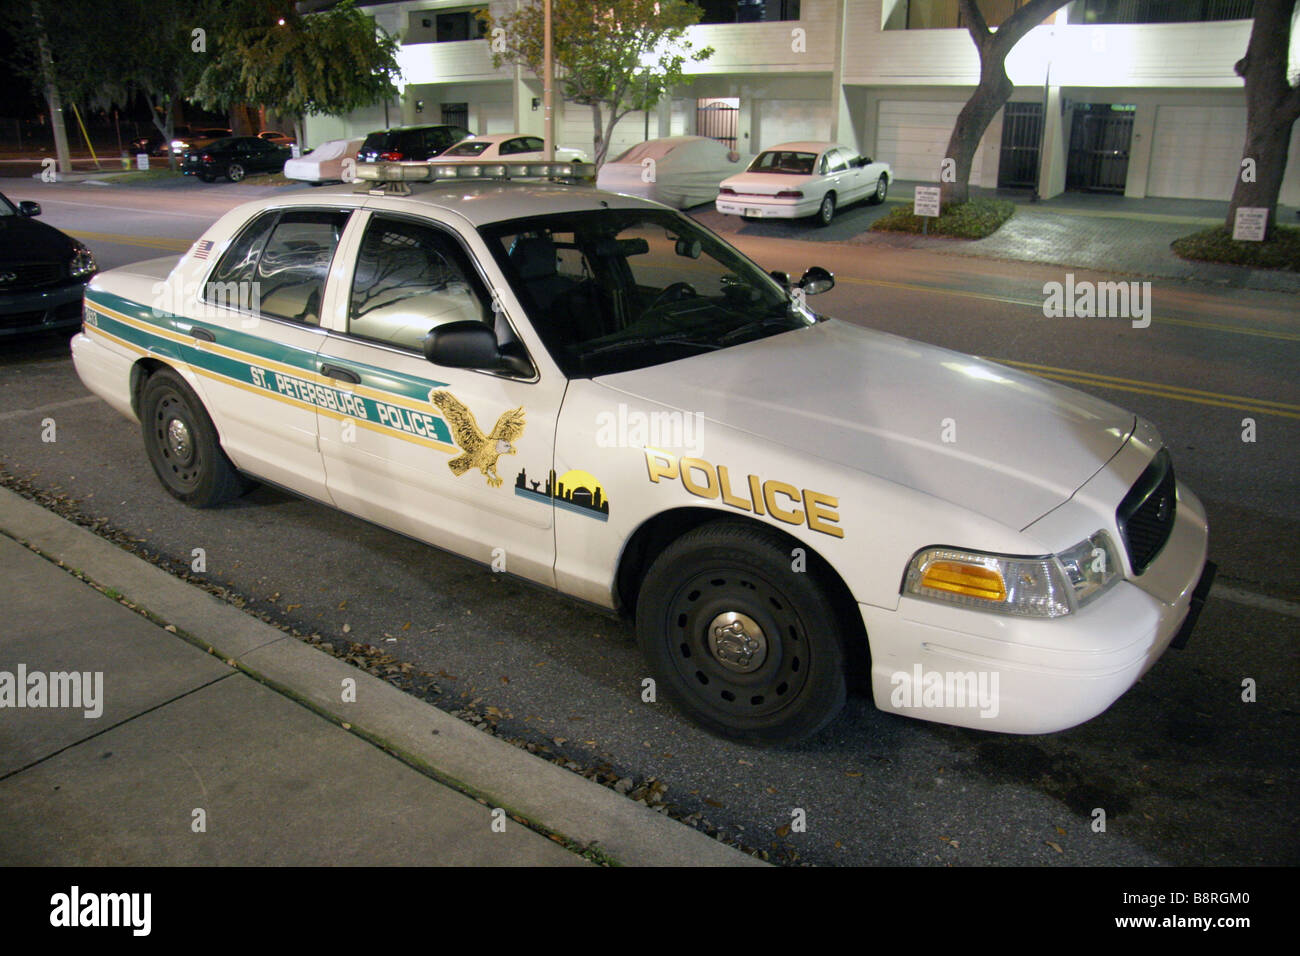 St Petersburg police car parked at night Downtown St Petersburg Florida USA Stock Photo